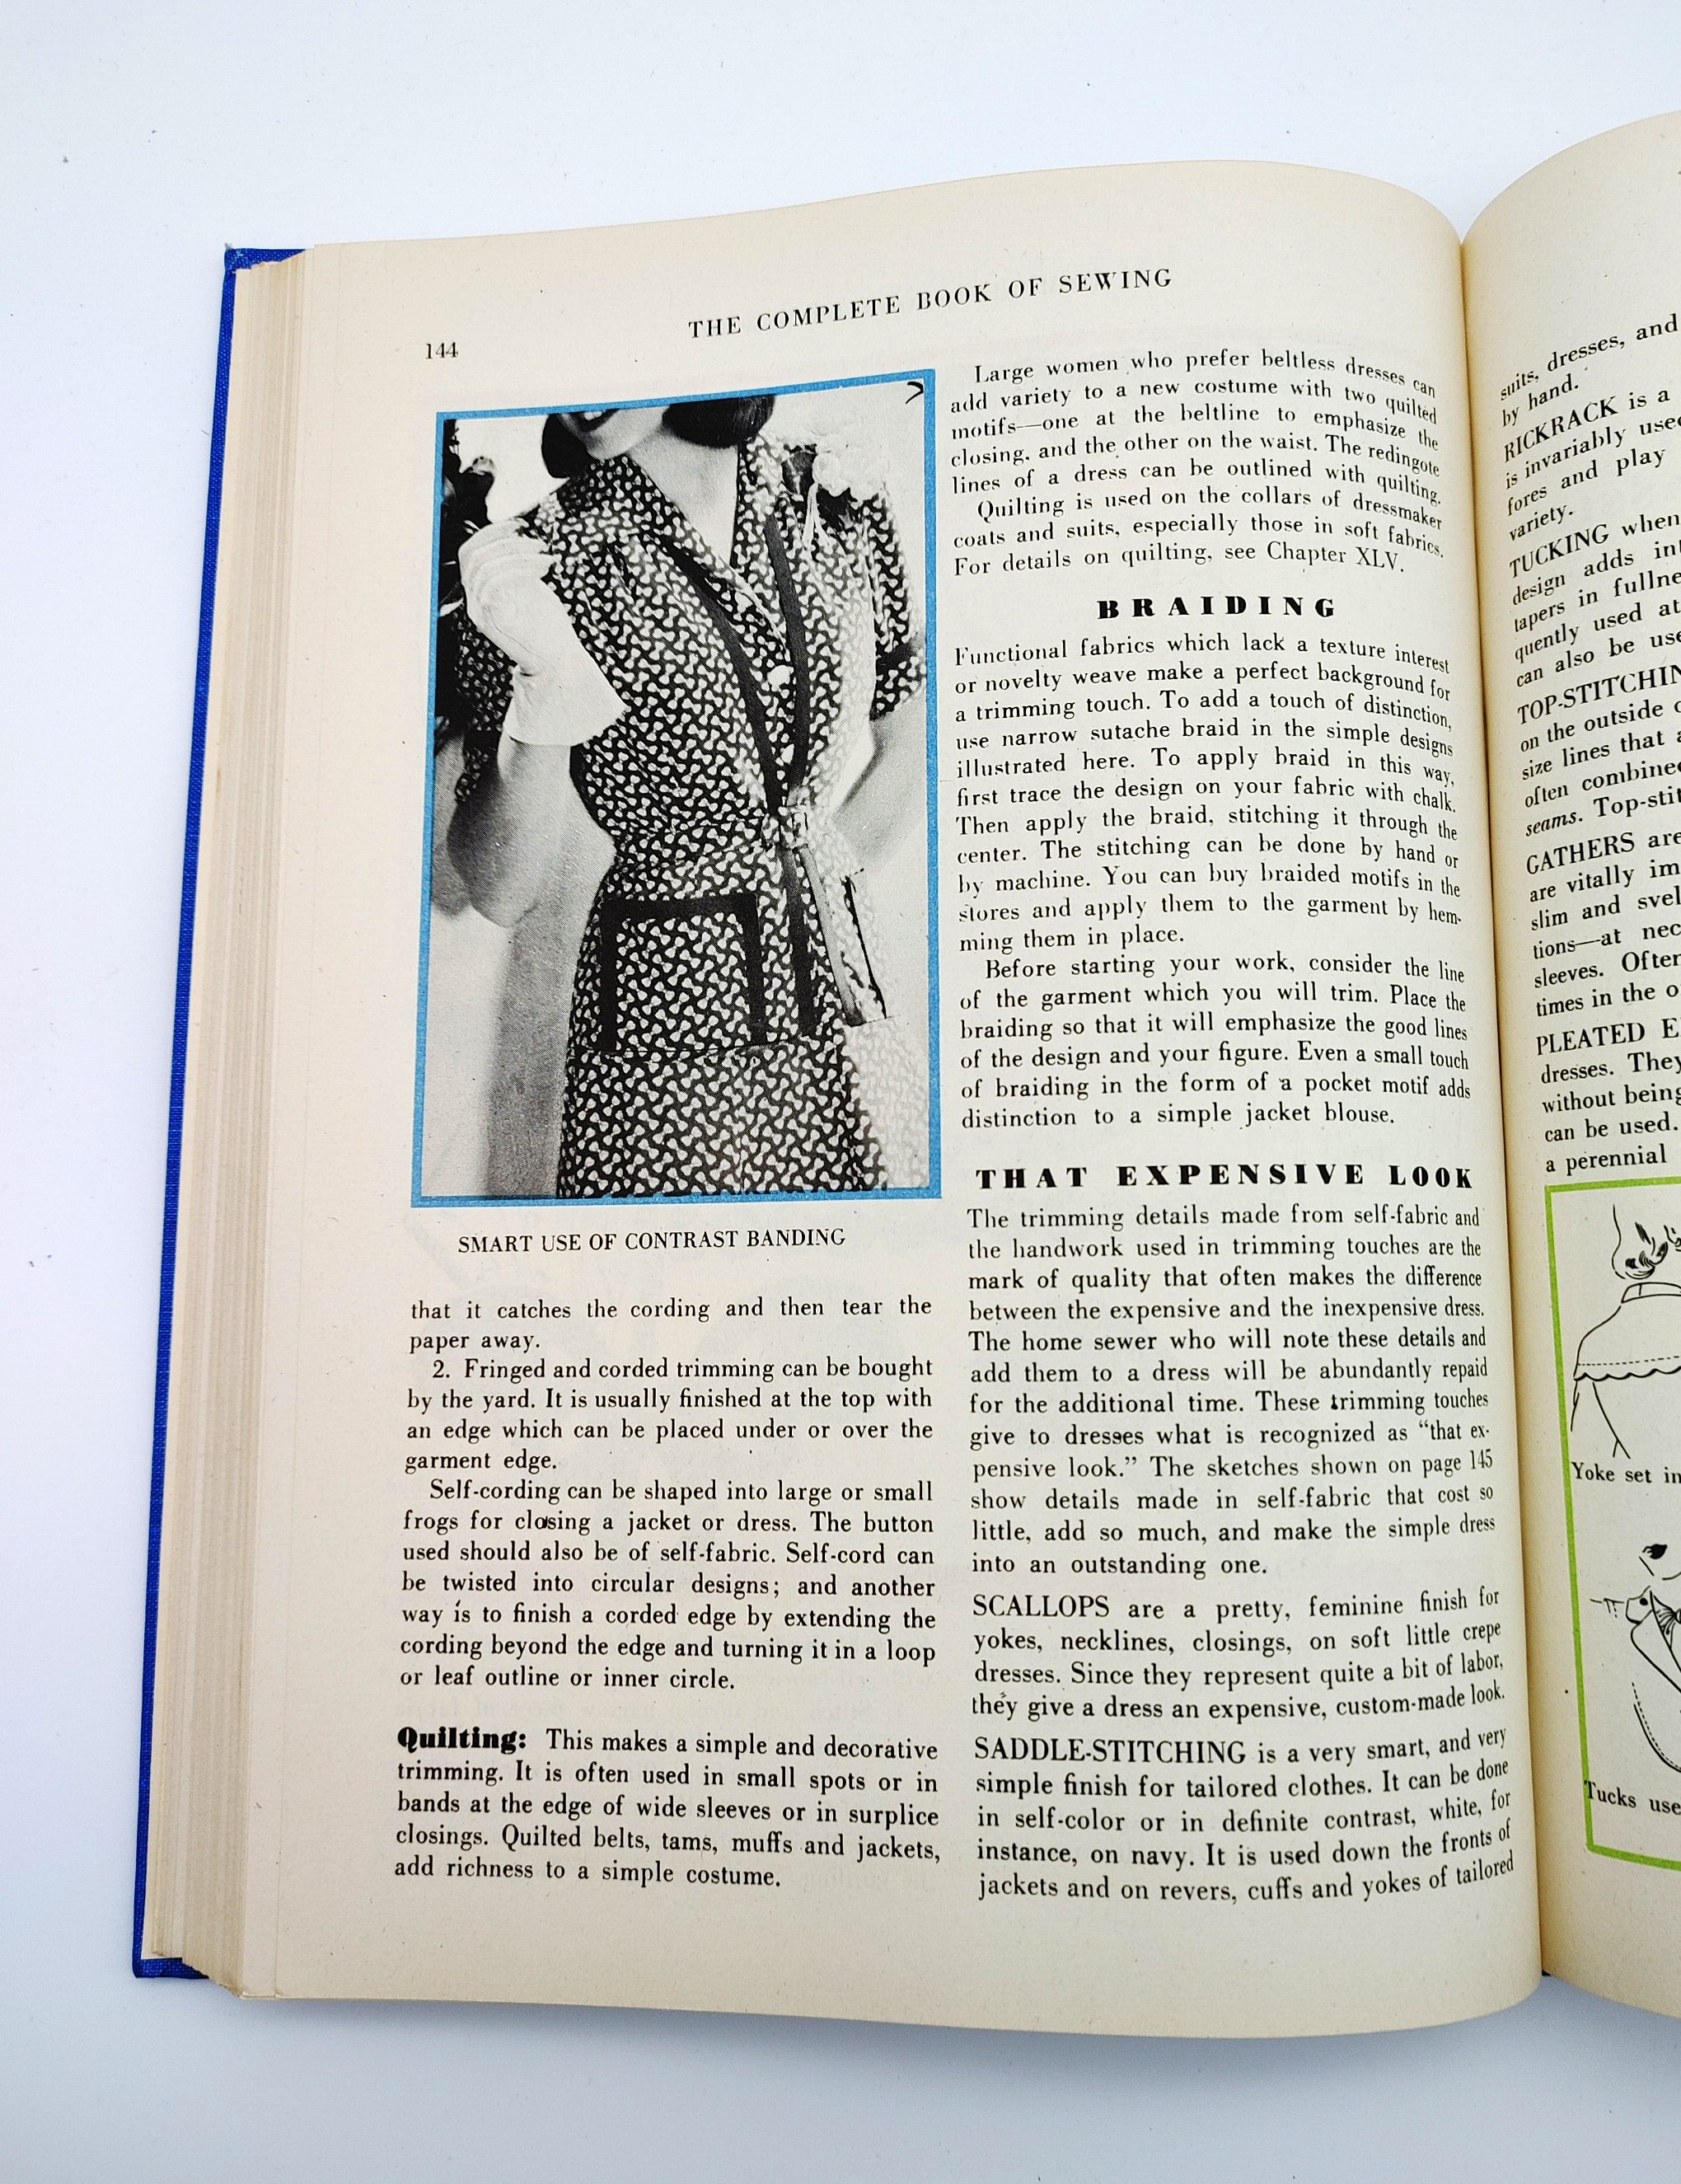 The Complete Book of Sewing (1943) – Opal Rare Books